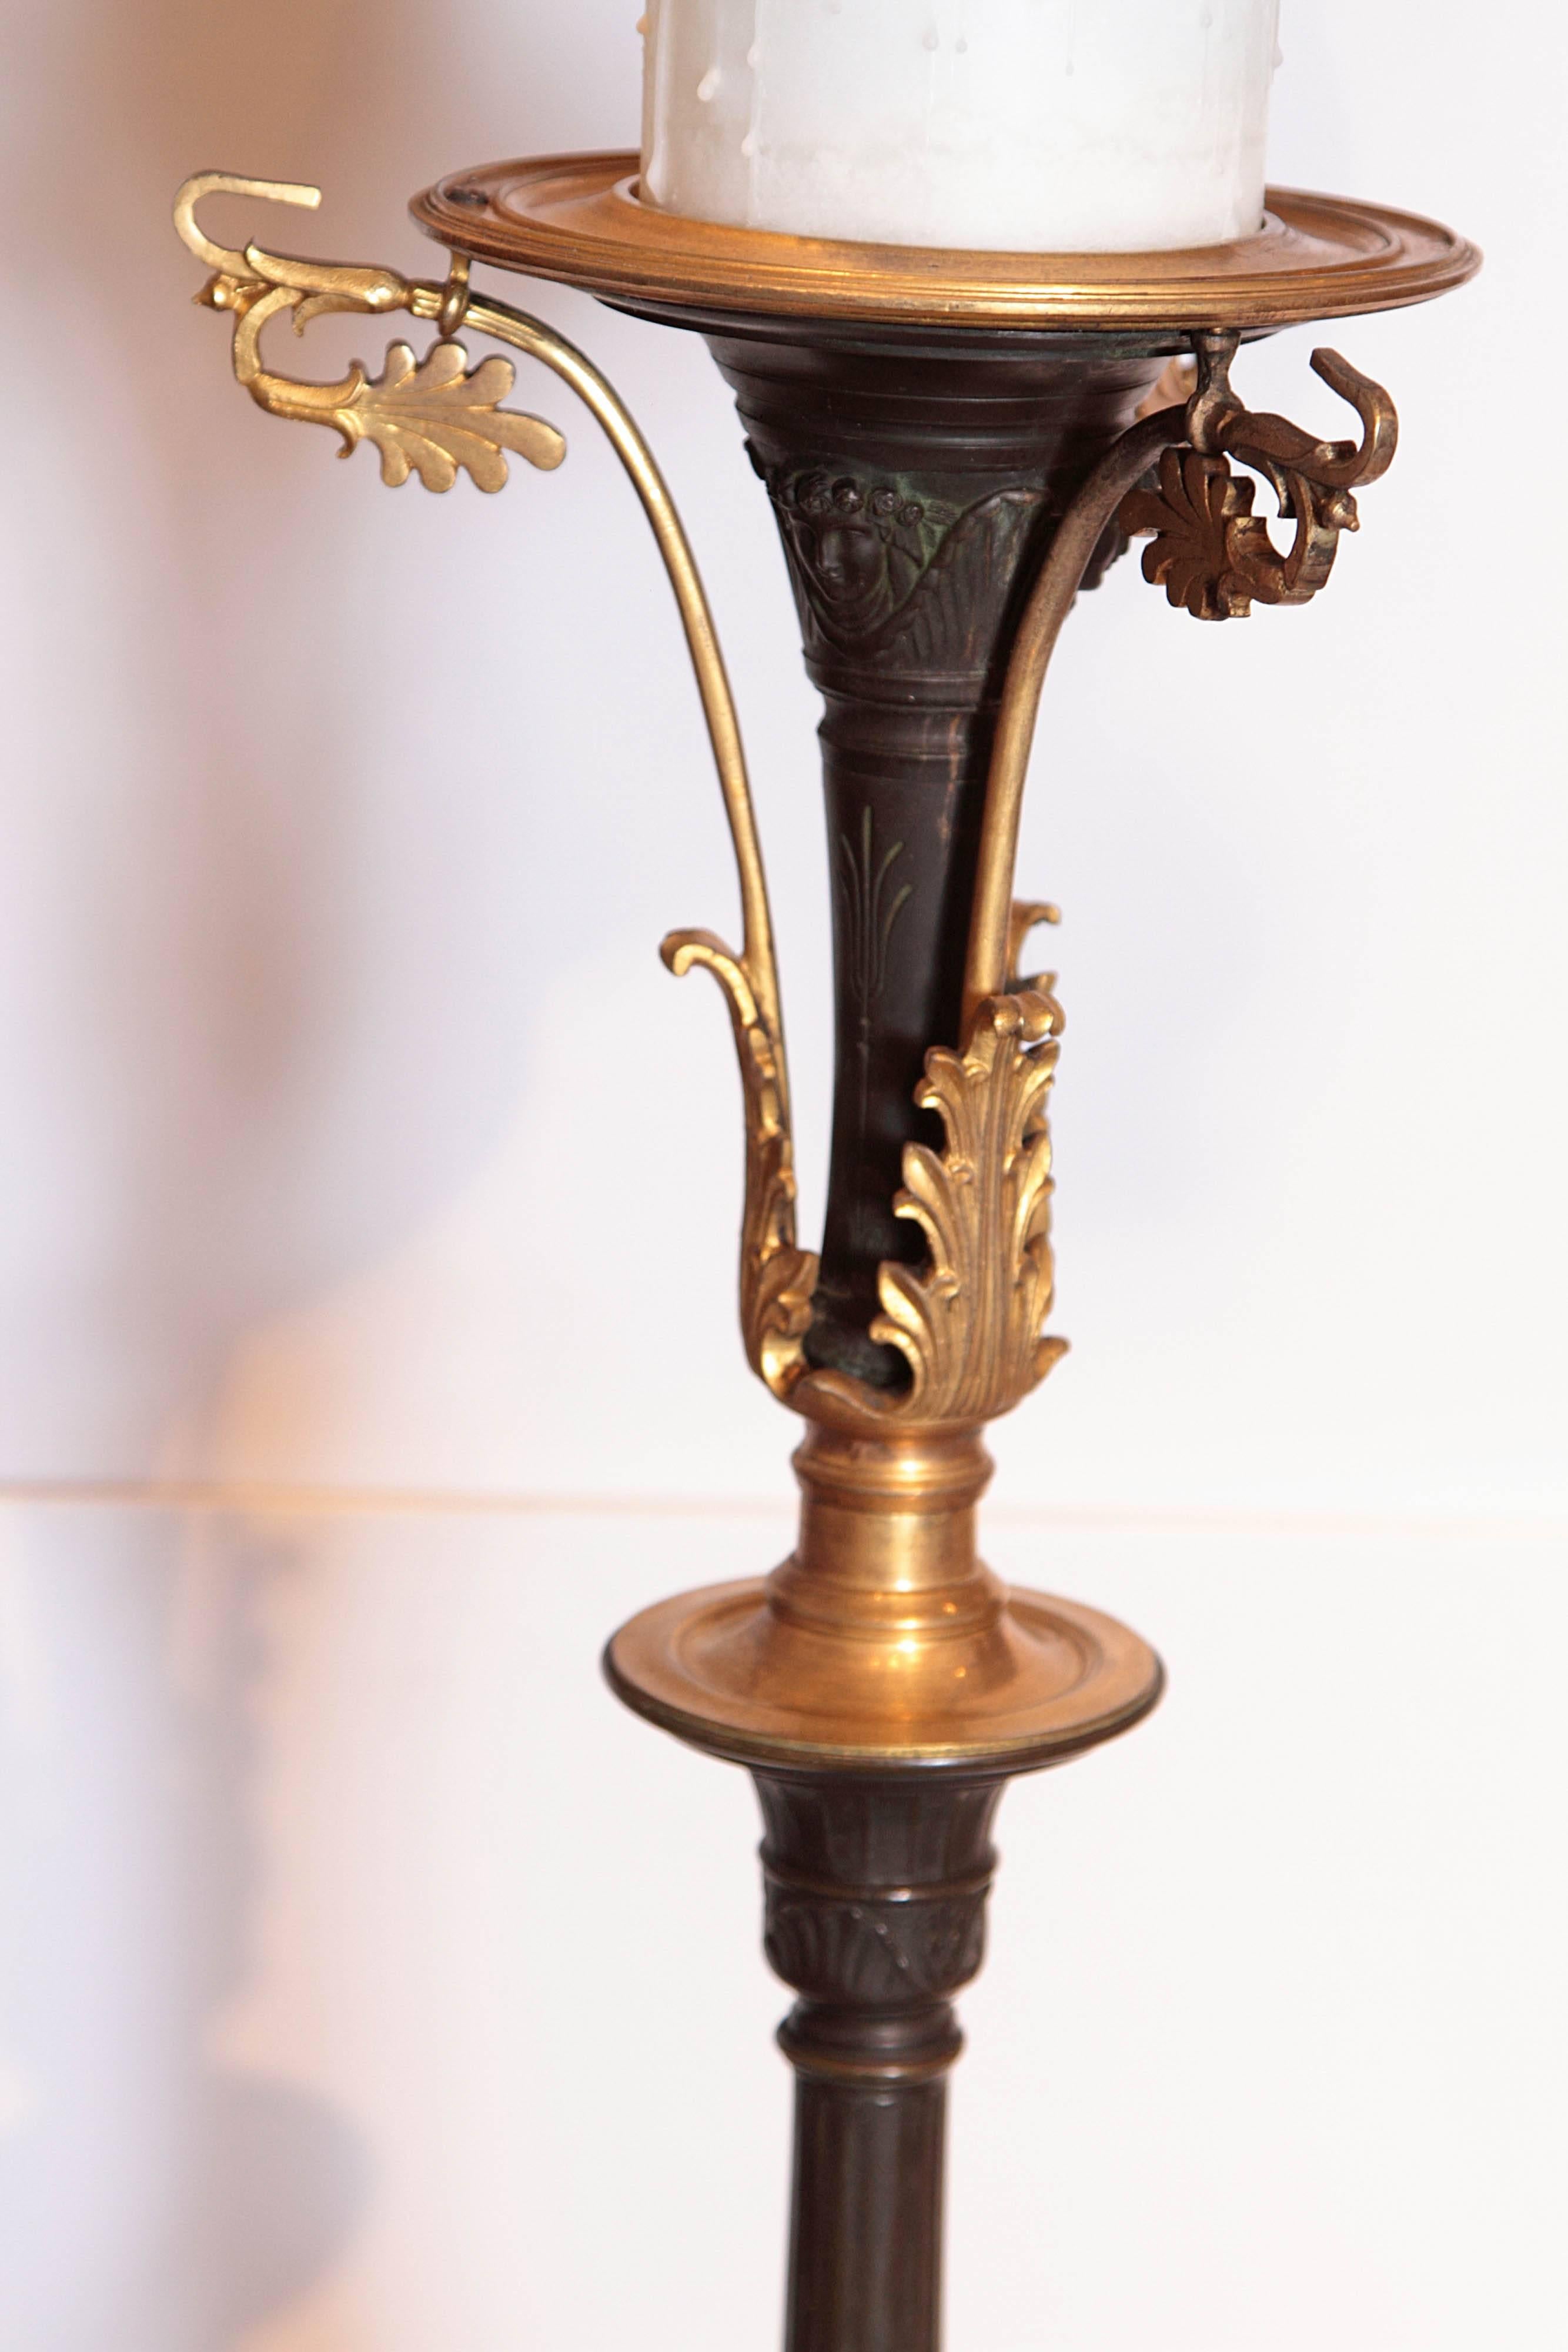 English Pair of 19th Century Continental Bronze and Gilt Bronze Torchiere Floor Lamps